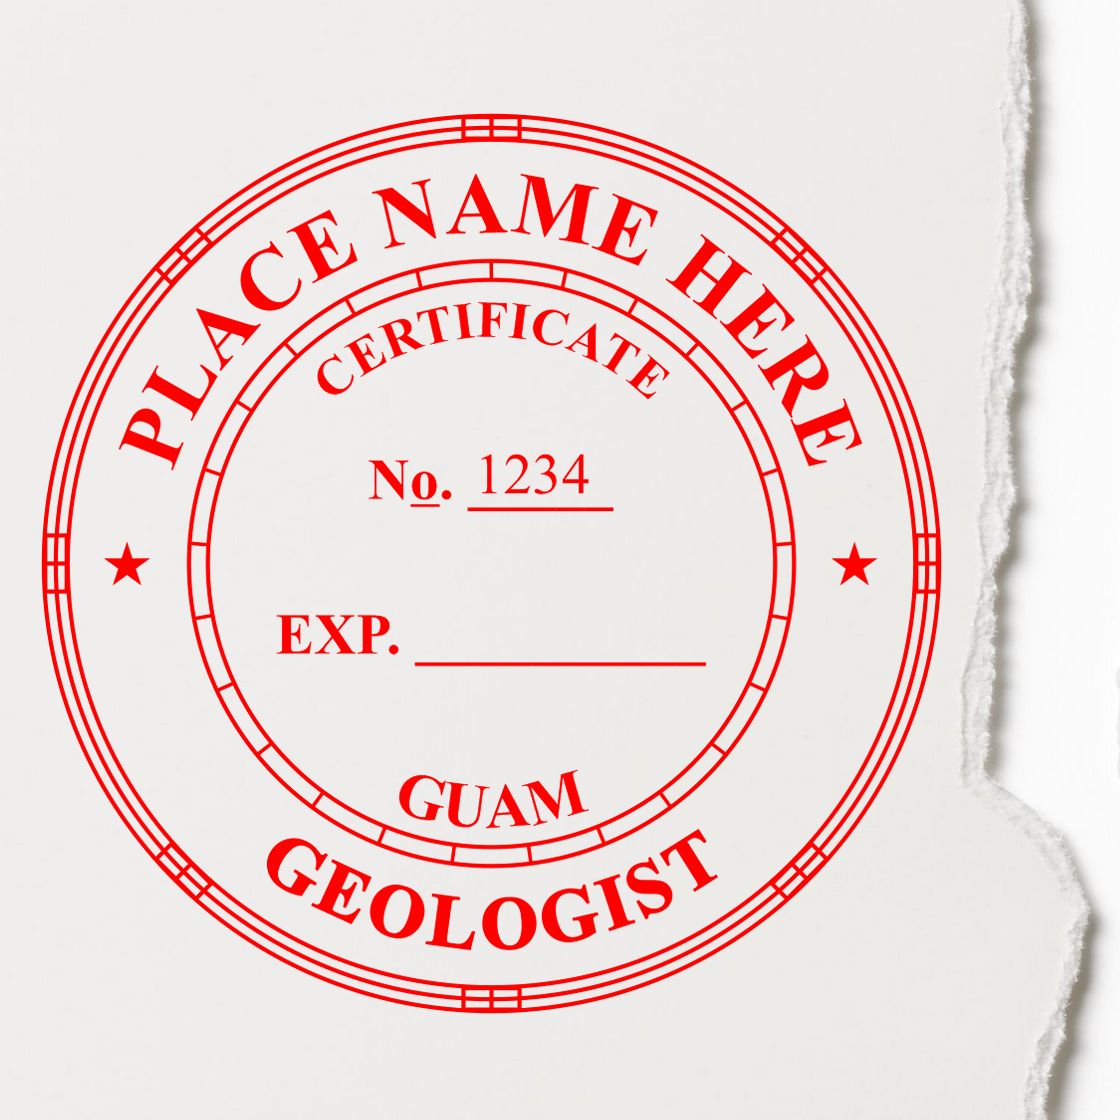 The Digital Guam Geologist Stamp, Electronic Seal for Guam Geologist stamp impression comes to life with a crisp, detailed image stamped on paper - showcasing true professional quality.